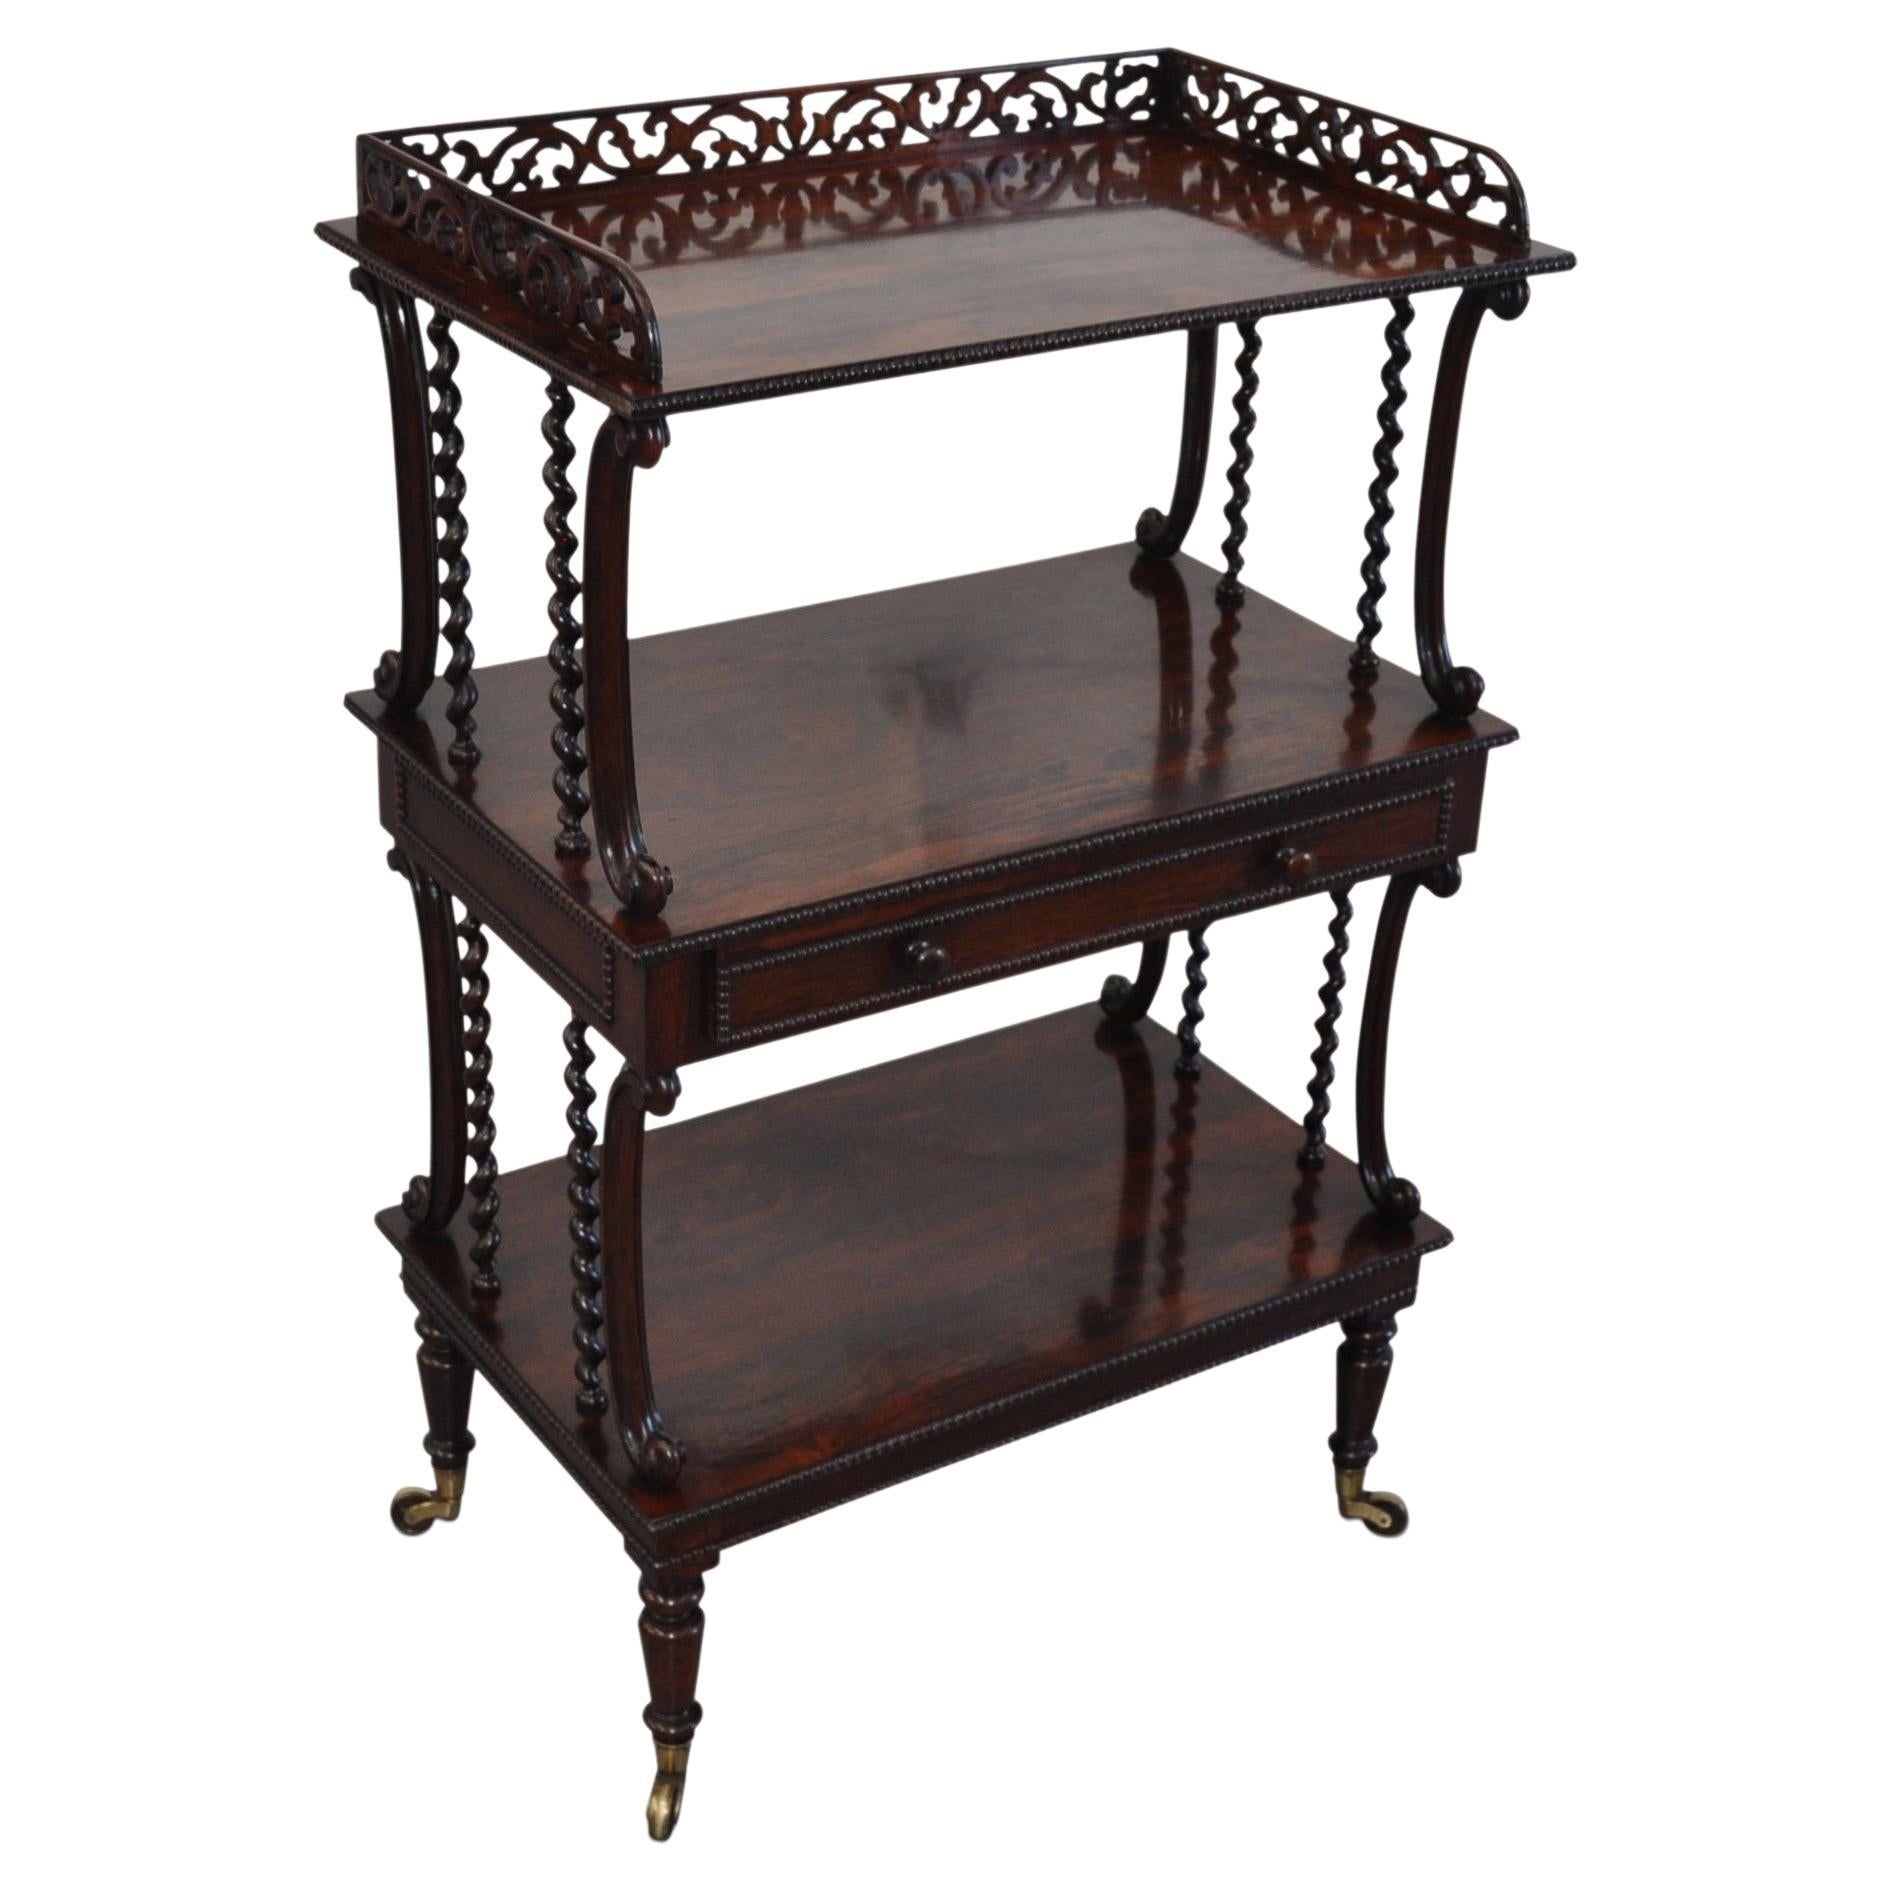 Rare and Unusual Regency Etagere For Sale